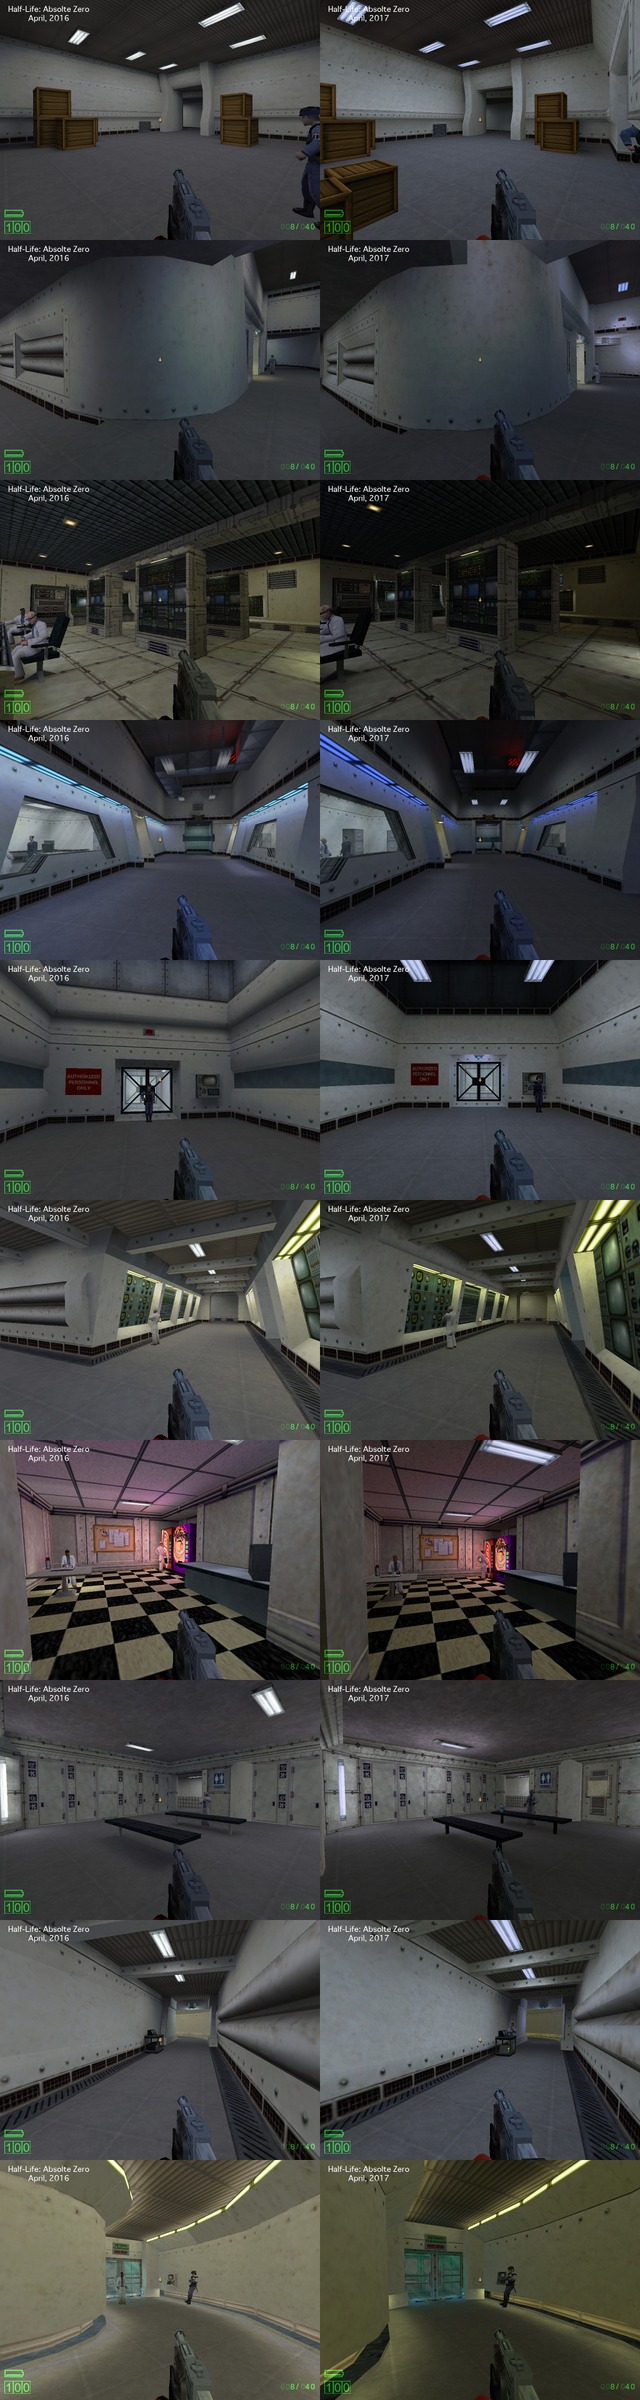 The evolution of Half-Life: Absolute Zero (namely the first map in the mod.)

These images are quite long, so you will need to click onto them to see the full thing. Advised to open them into a new tab to see them at their original resolution.

2014 - Development starts picking up steam again, level design being headed by GaussGunner and myself. ZedMarine would be slowly be making a return during this era.
2015 - Zed would become level design lead again, GaussGunner would start taking a back seat and would eventually leave to pursue new artistic endeavors. We would finally drop the name "Half-Life E3 1998" later in August and become "Half-Life: Absolute Zero." Demo was planned to be released early 2016 and a full release to follow only a few months afterwards. Blue24 would join the team early that year, marking the retirement of the 2010-2012 code.
2016 - Reality sinks in, we knew Half-Life: Absolute Zero was not in the state to ship early that year as a demo. Various maps that were functioning months prior were no longer playable and discussion on whatever or not development should be restarted again began. We would be able to salvage the maps, but disaster struct once more. The April build that sparked the discussion of rebooting development ended up leaking to the public and everyone could see the state of HLAZ as of April of 2016.
2017 - Things start to start looking up for the mod! Pre-demo testing went good and it was being well received among play testers. A few odd decisions would take place in the month prior to the demo shipping, but overall the Demo was overall well received. 
2018 - Things were looking up for the project, everything seemed to be going as planned... Until, well, you know the rest of the story.